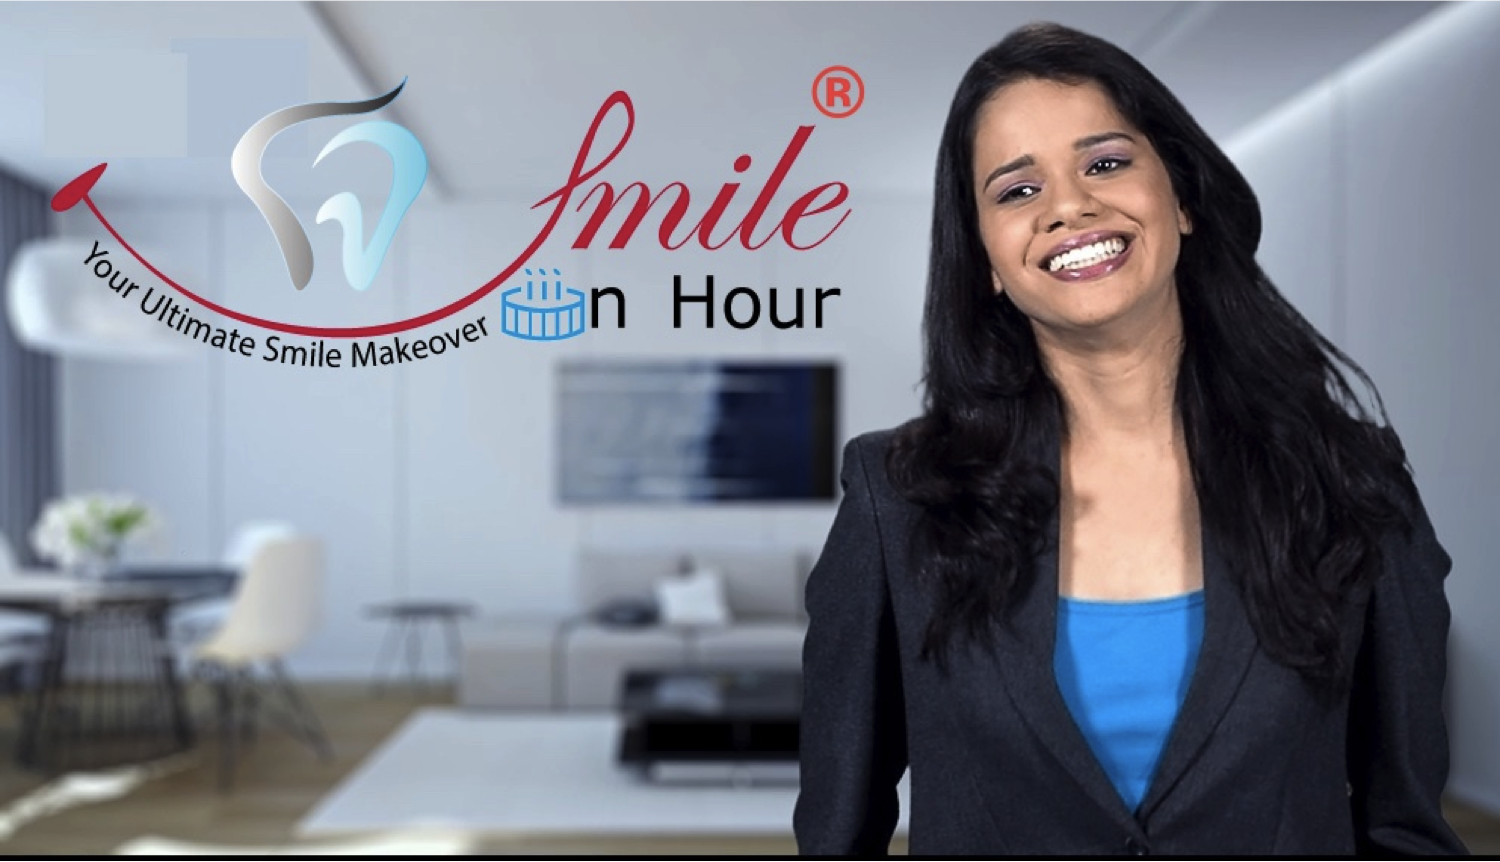 Smile in Hour